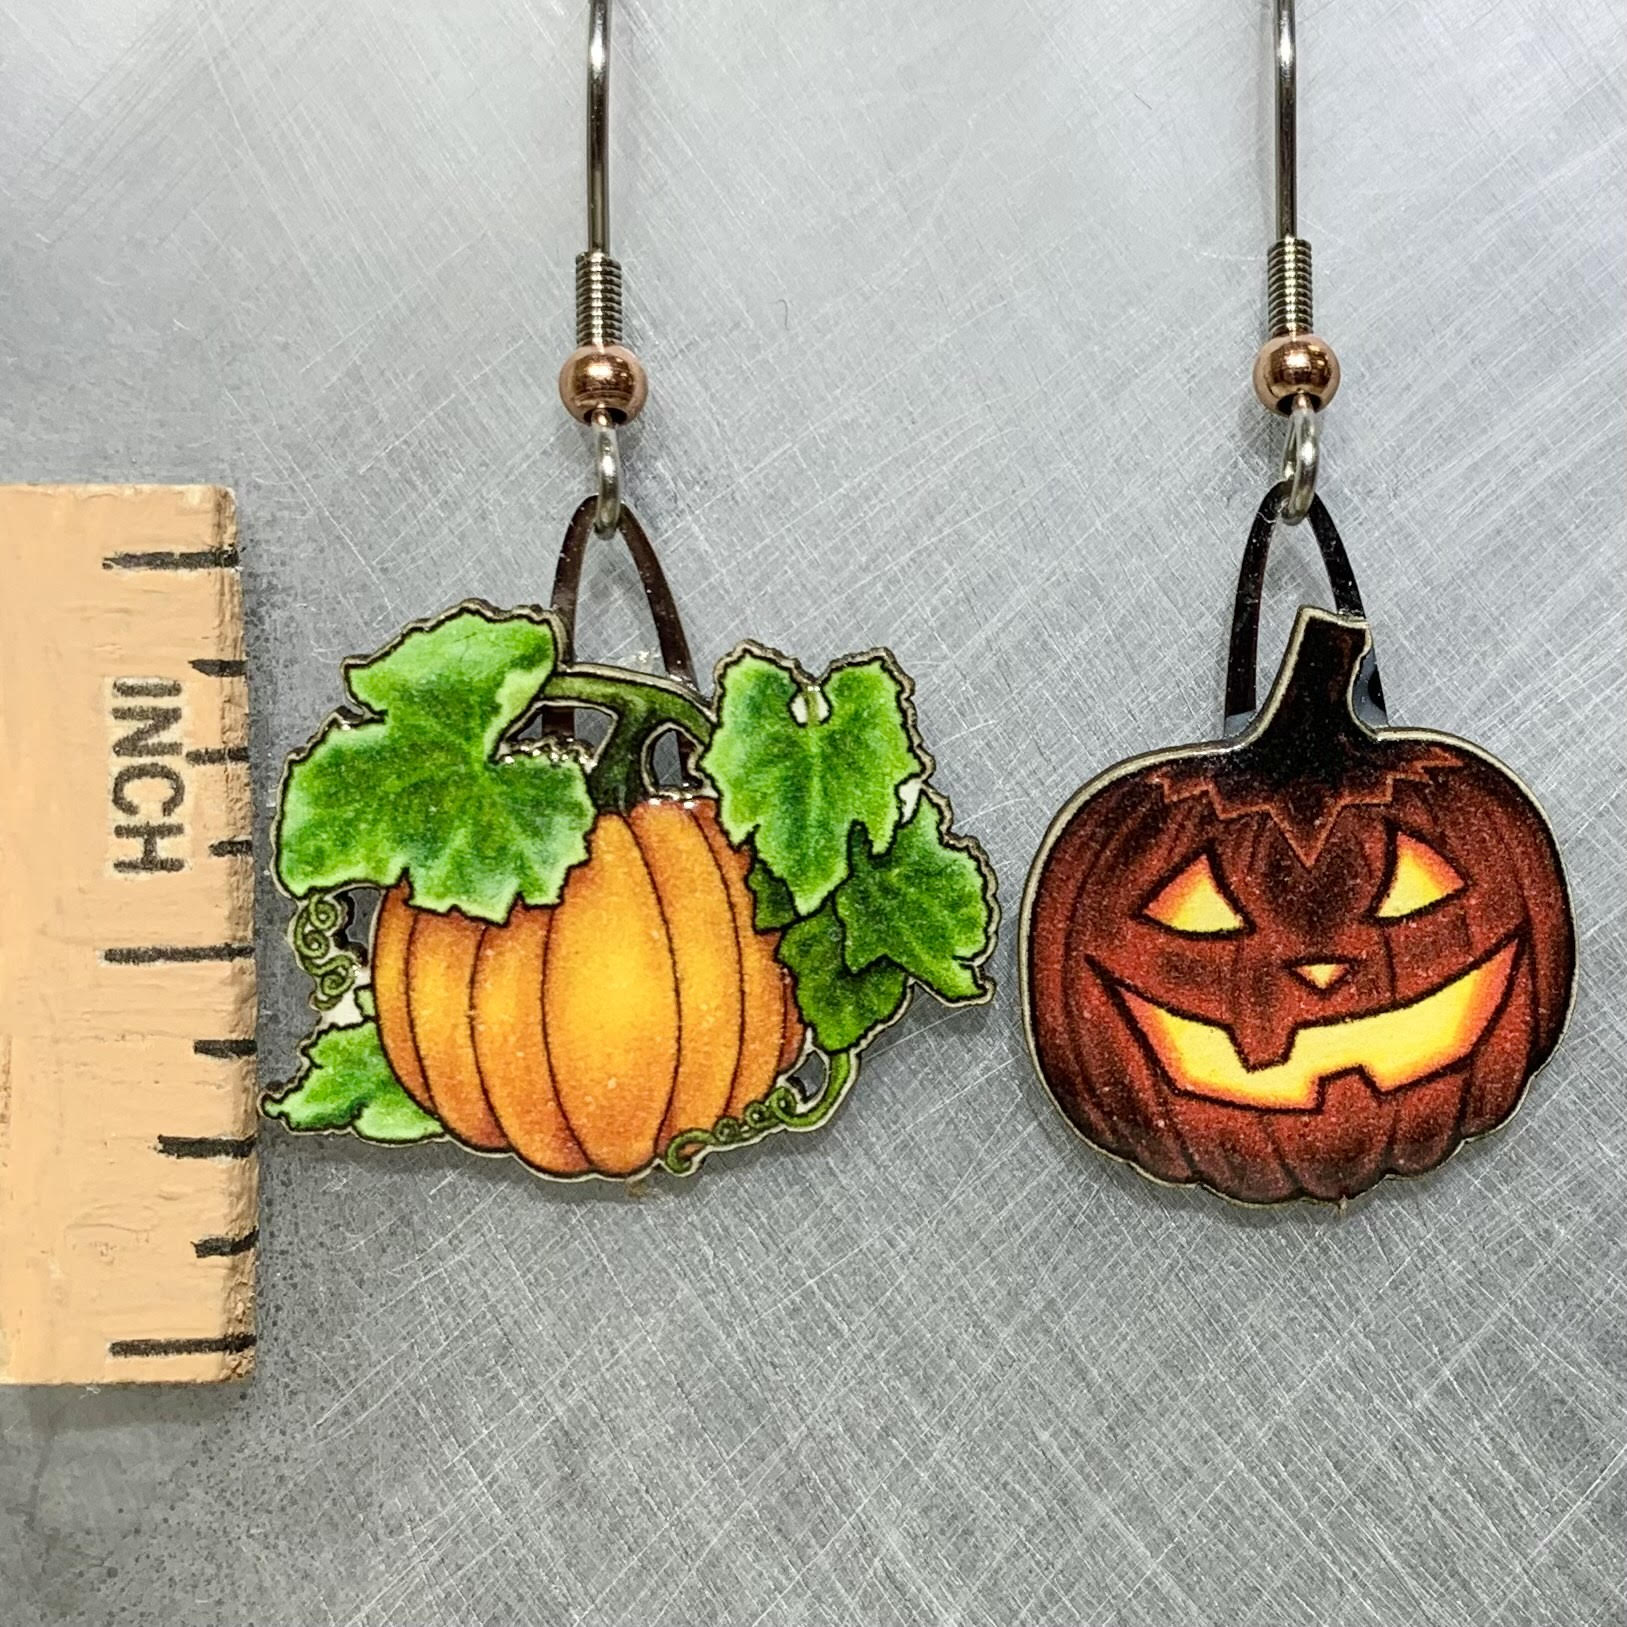 Picture shown is of 1 inch tall pair of earrings of a Jack-o-Lantern.